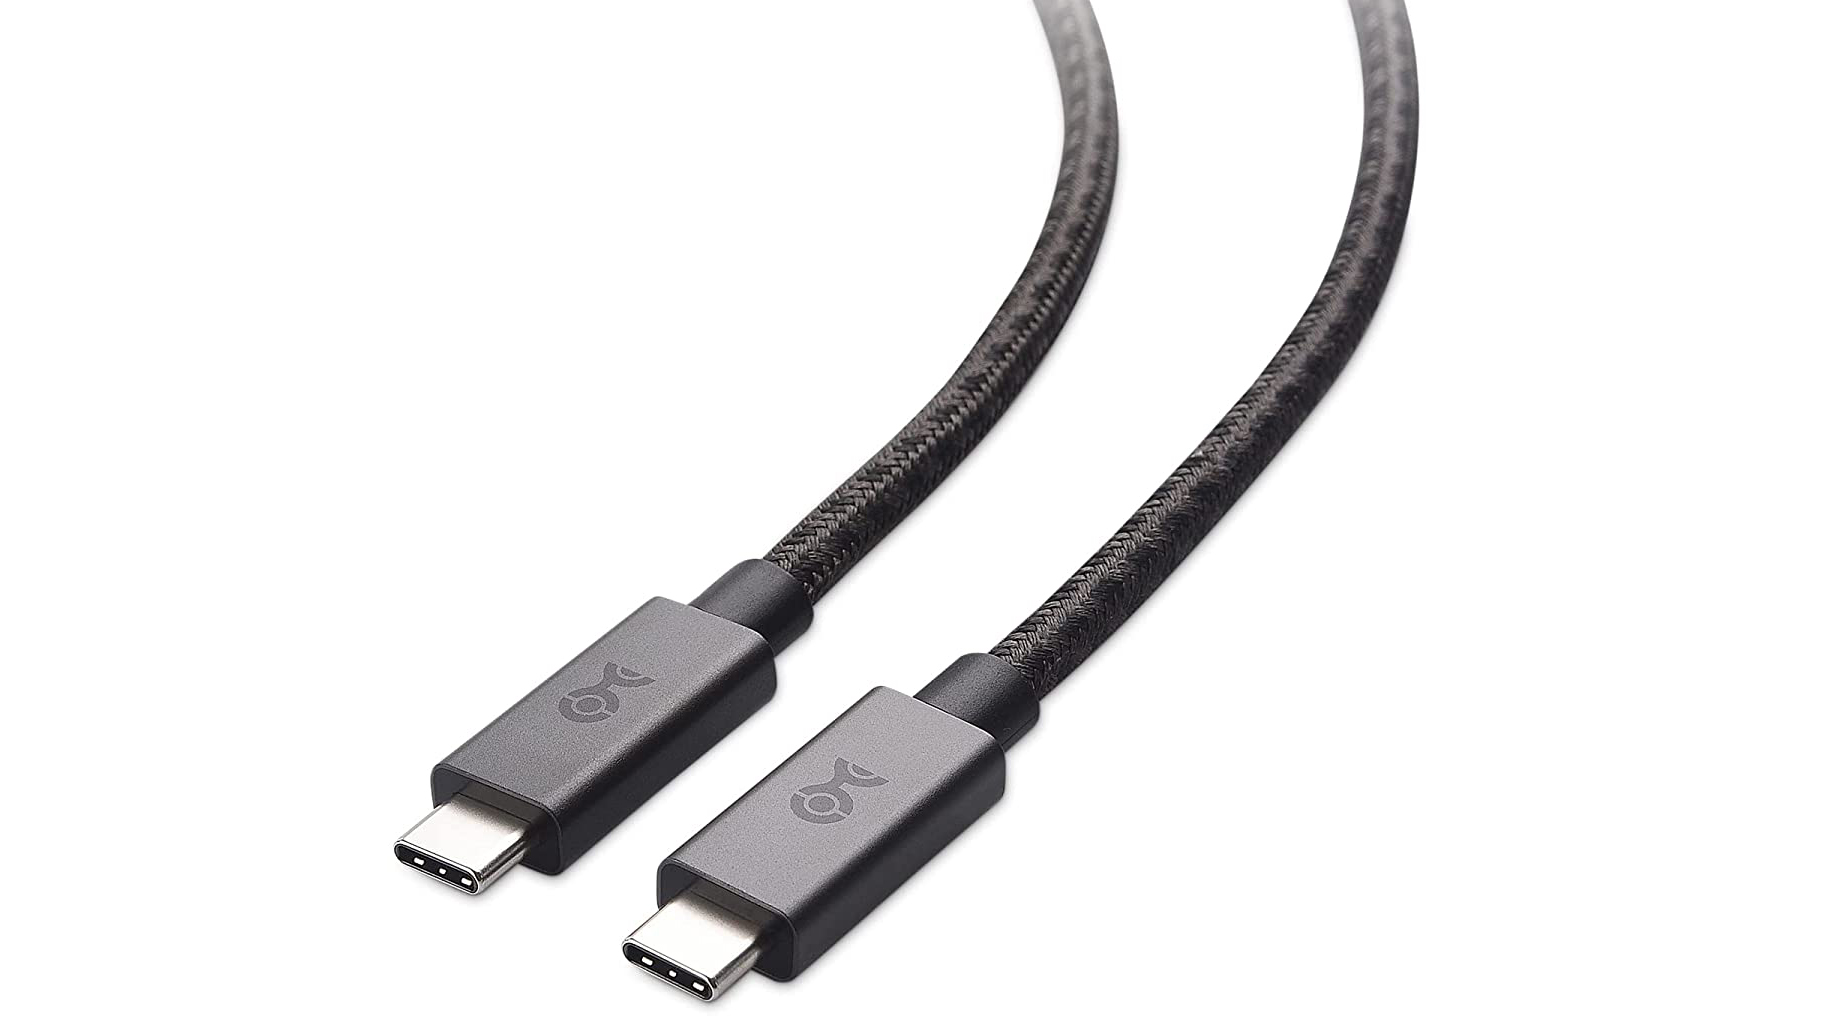 Cable Matters Braided Long USB C Cable 10 ft with 100W Power Delivery